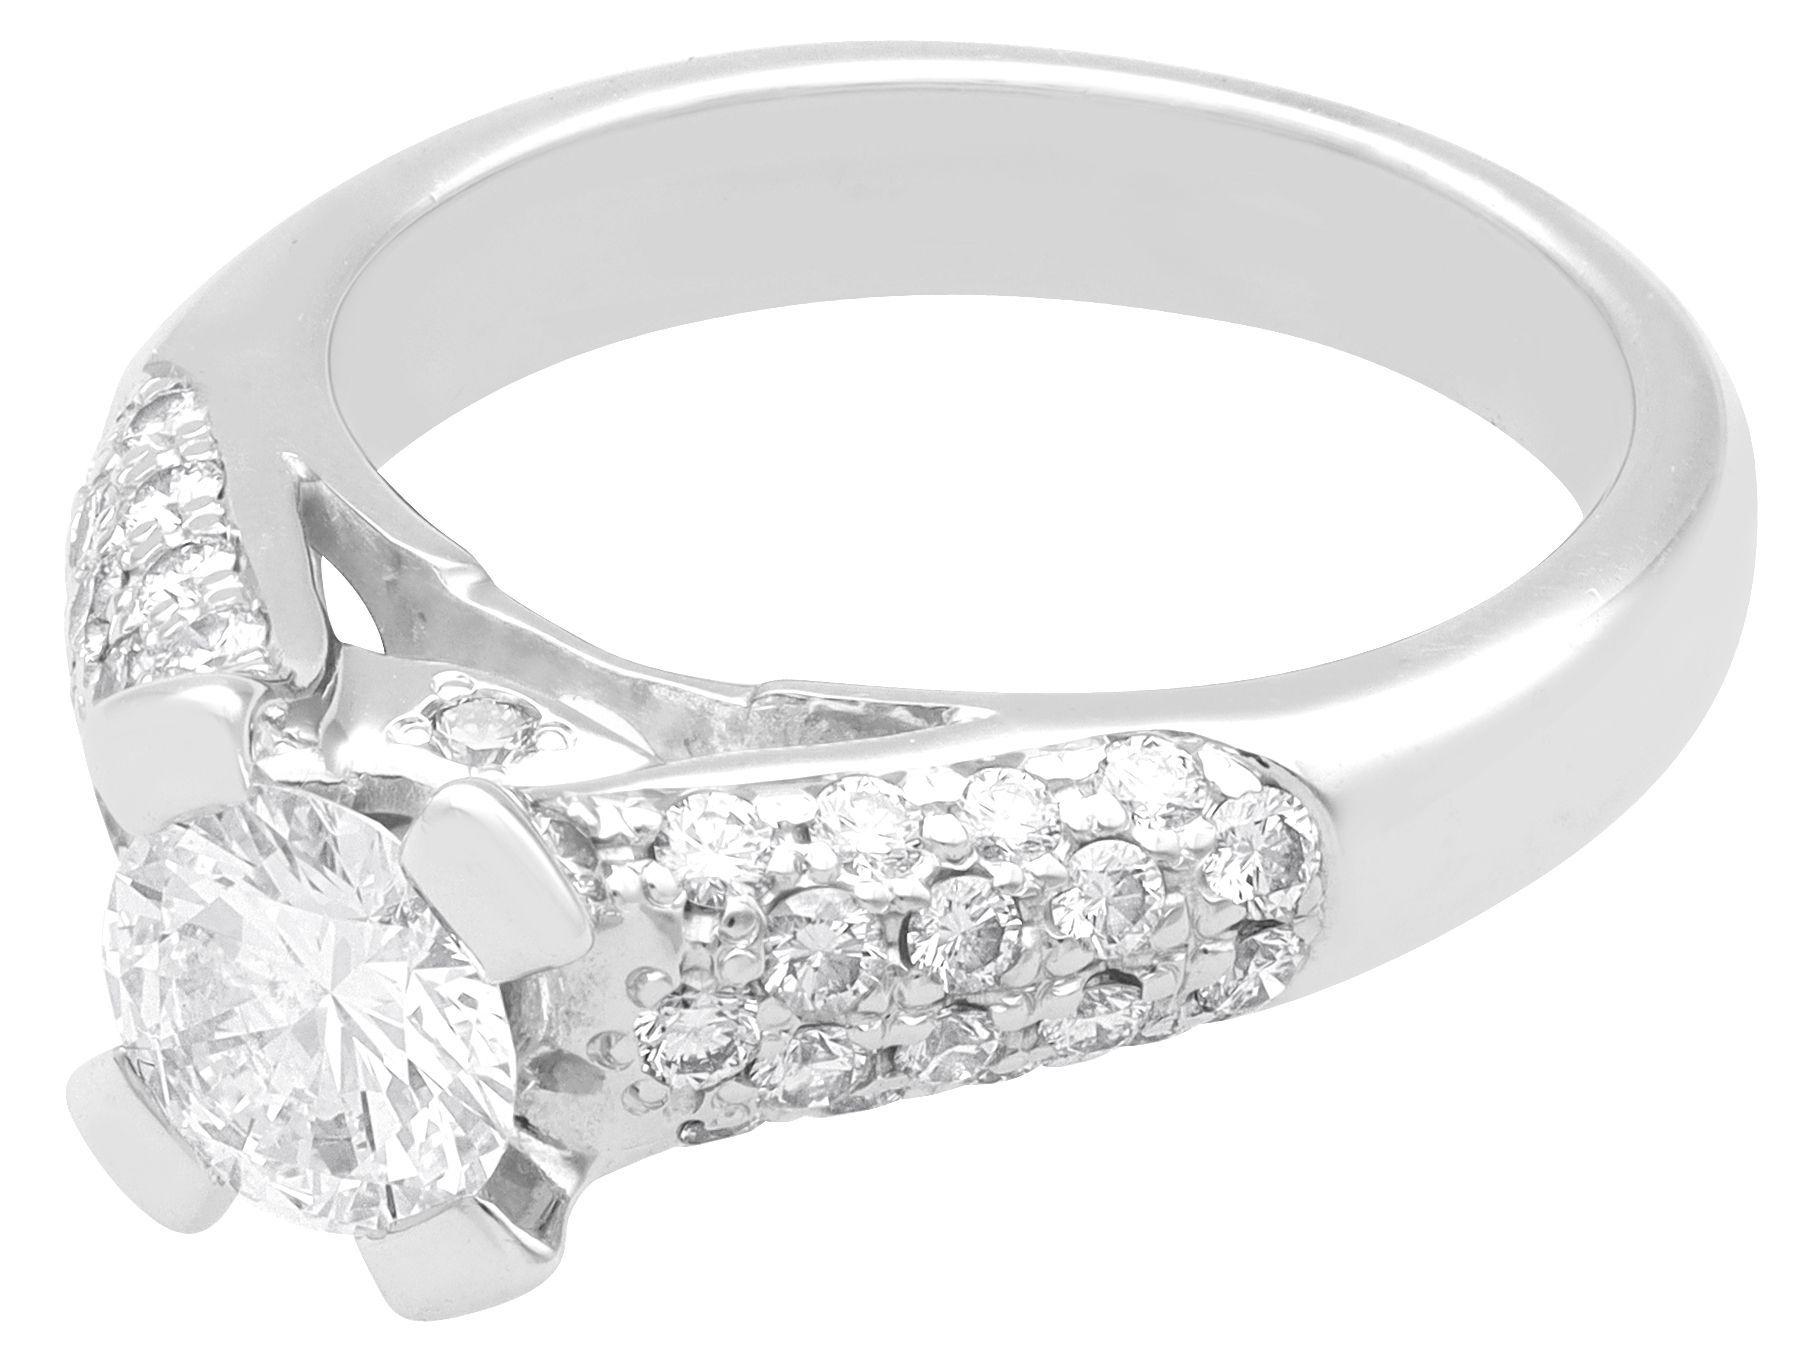 A stunning, fine and impressive vintage 1 Carat (total) diamond and 18 Carat white gold solitaire ring; part of our diverse vintage diamond ring collection.

This stunning, fine and impressive vintage diamond ring has been crafted in 18k white